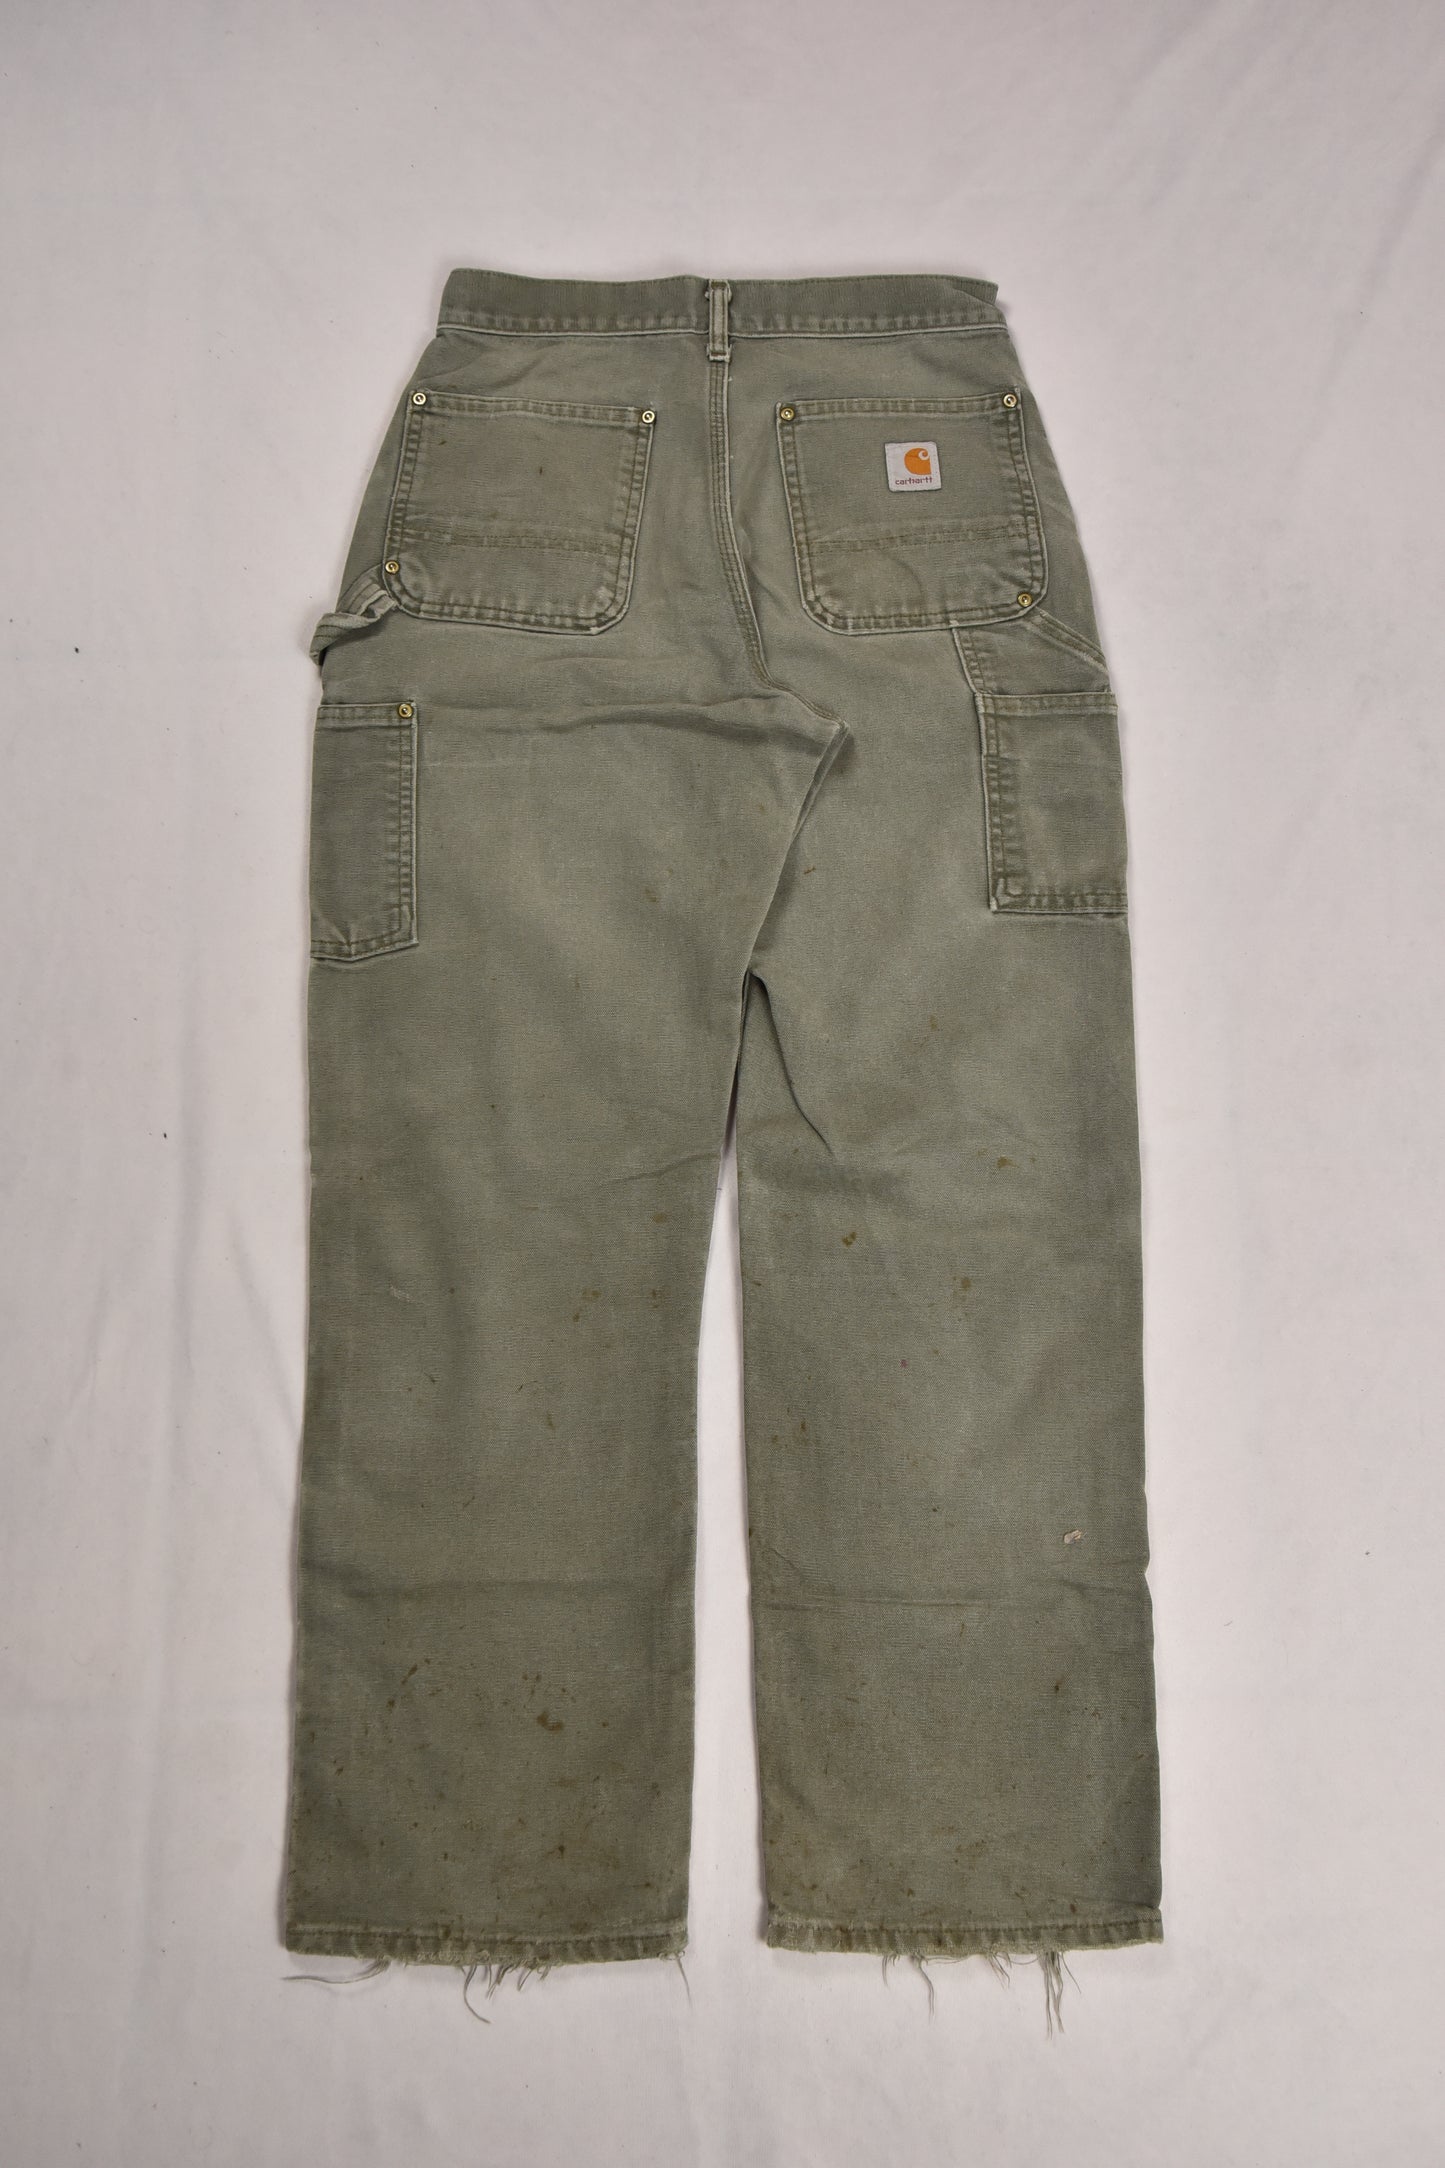 Carhartt Double Knee Workwear Made in USA Pants Vintage / 28x30